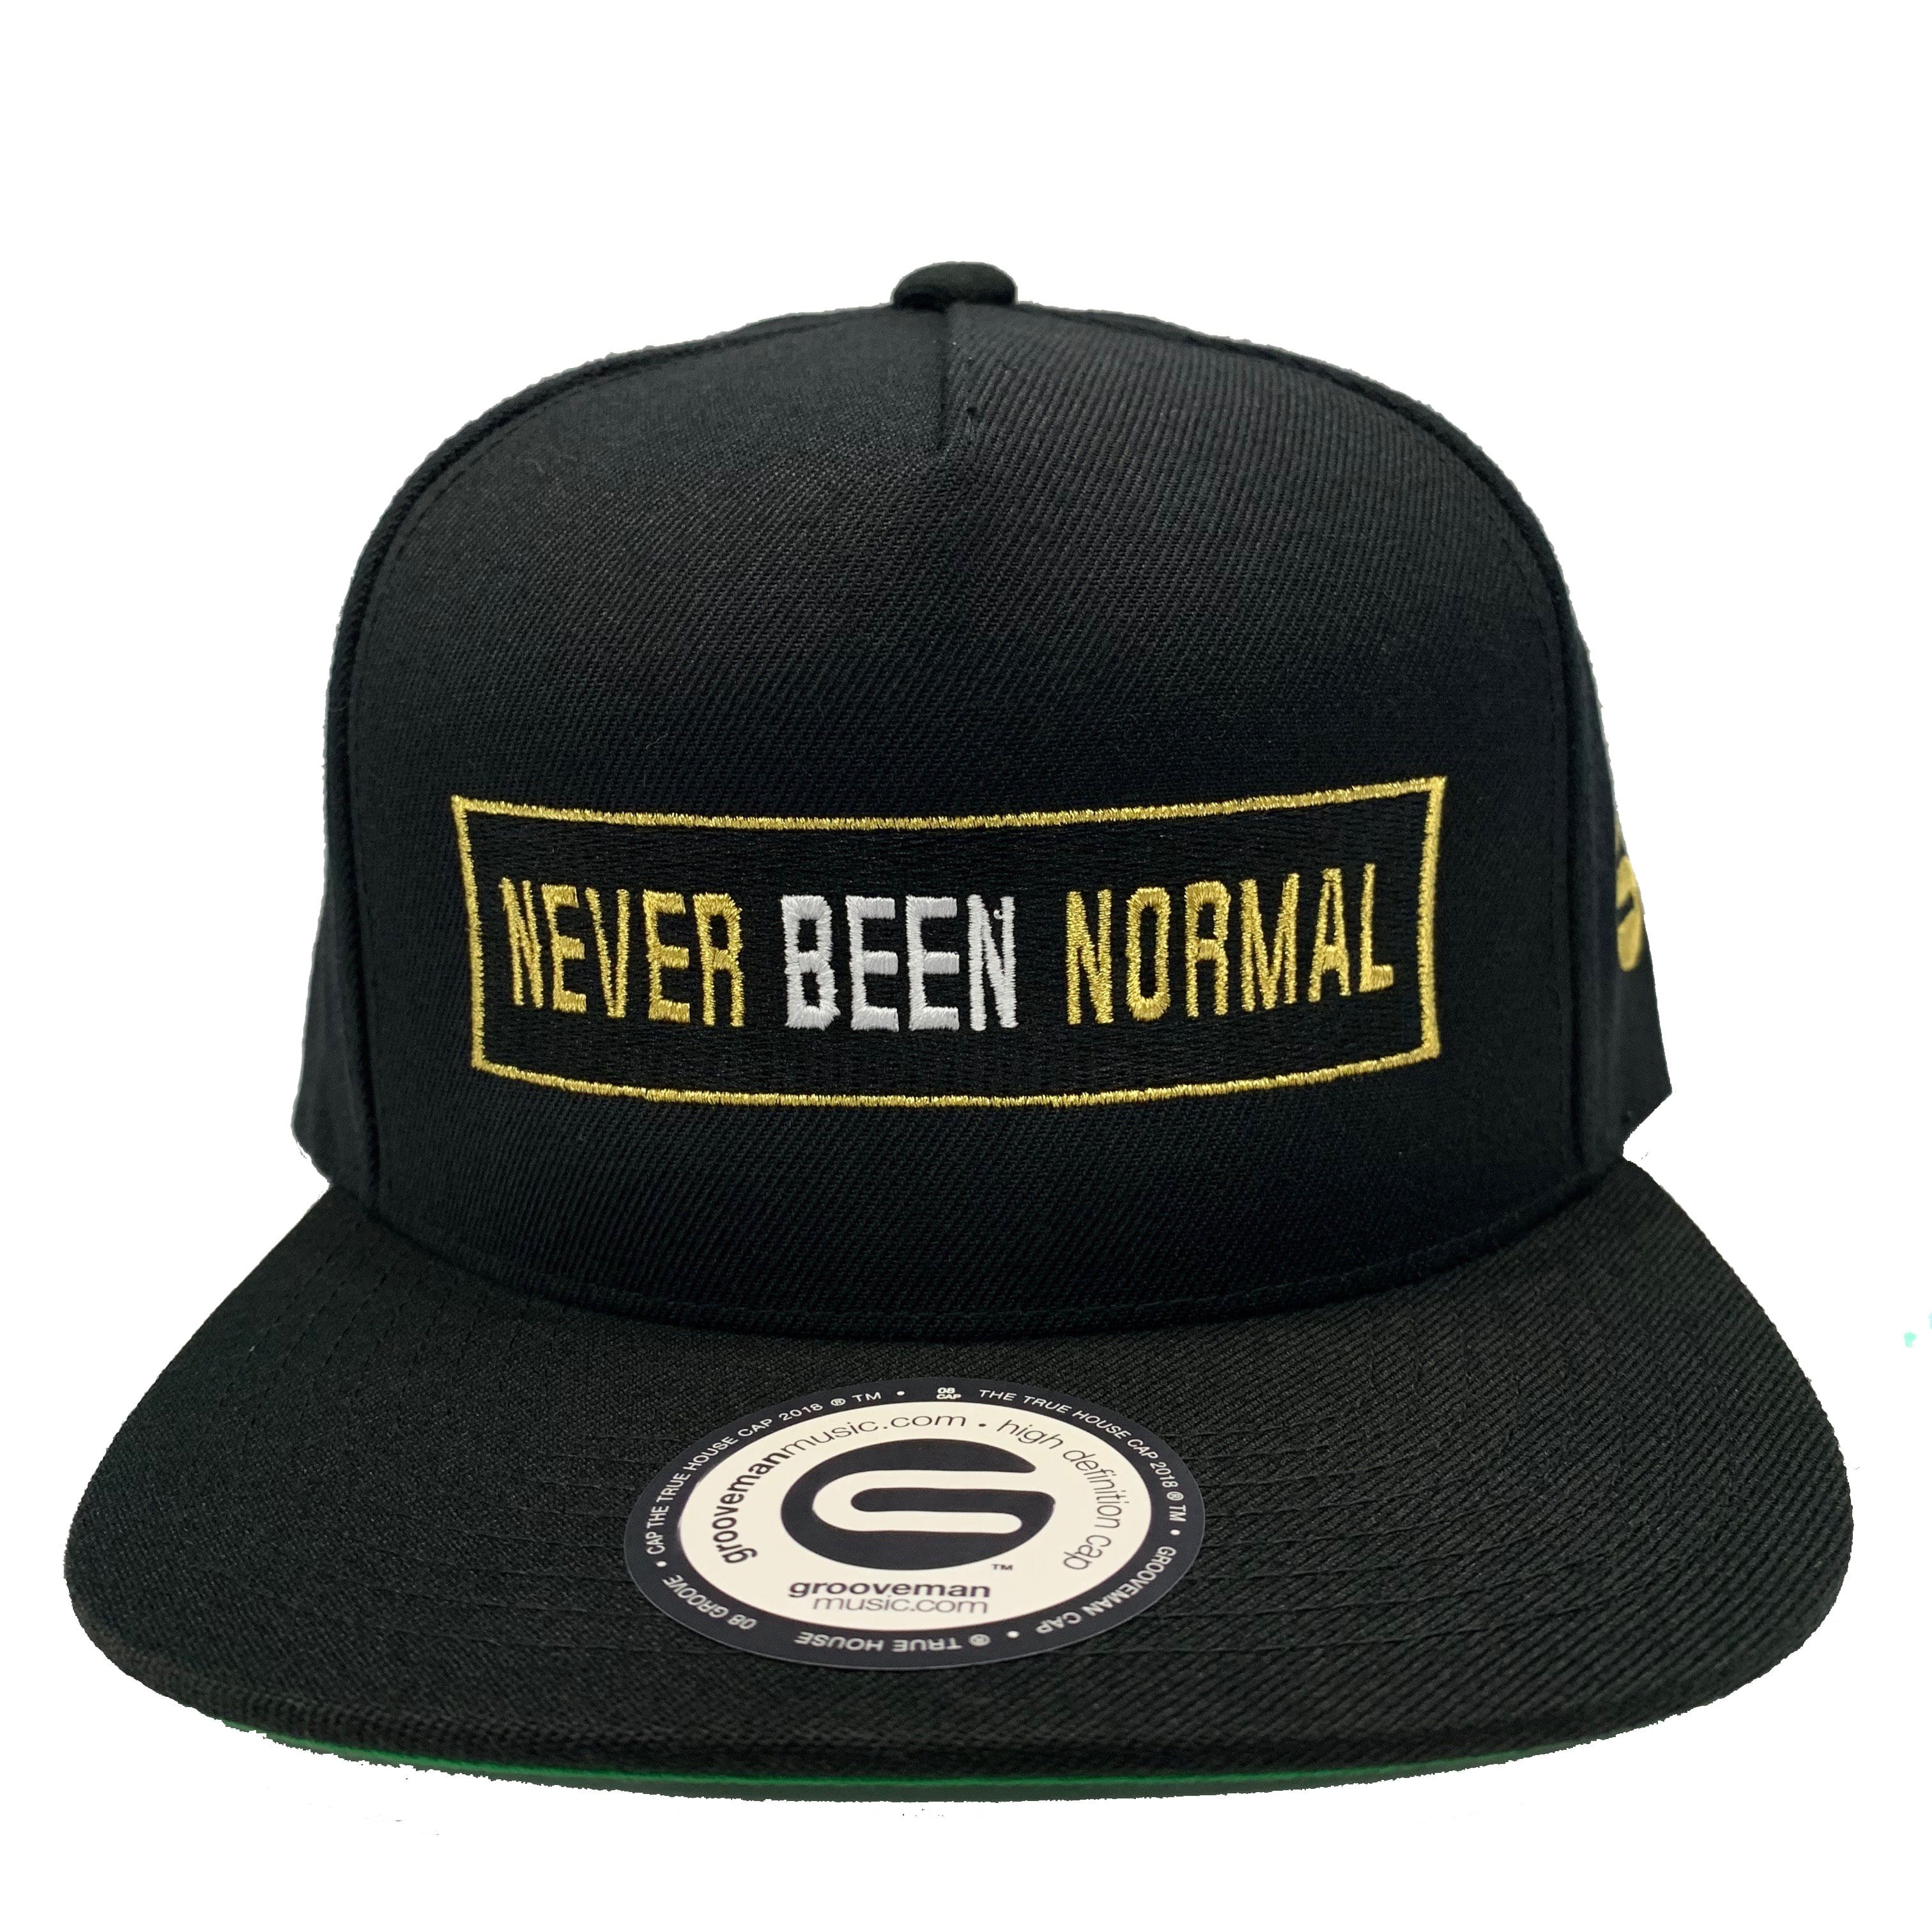 Grooveman Music Hats One Size / Black Never Been Normal Black Snapback Hat